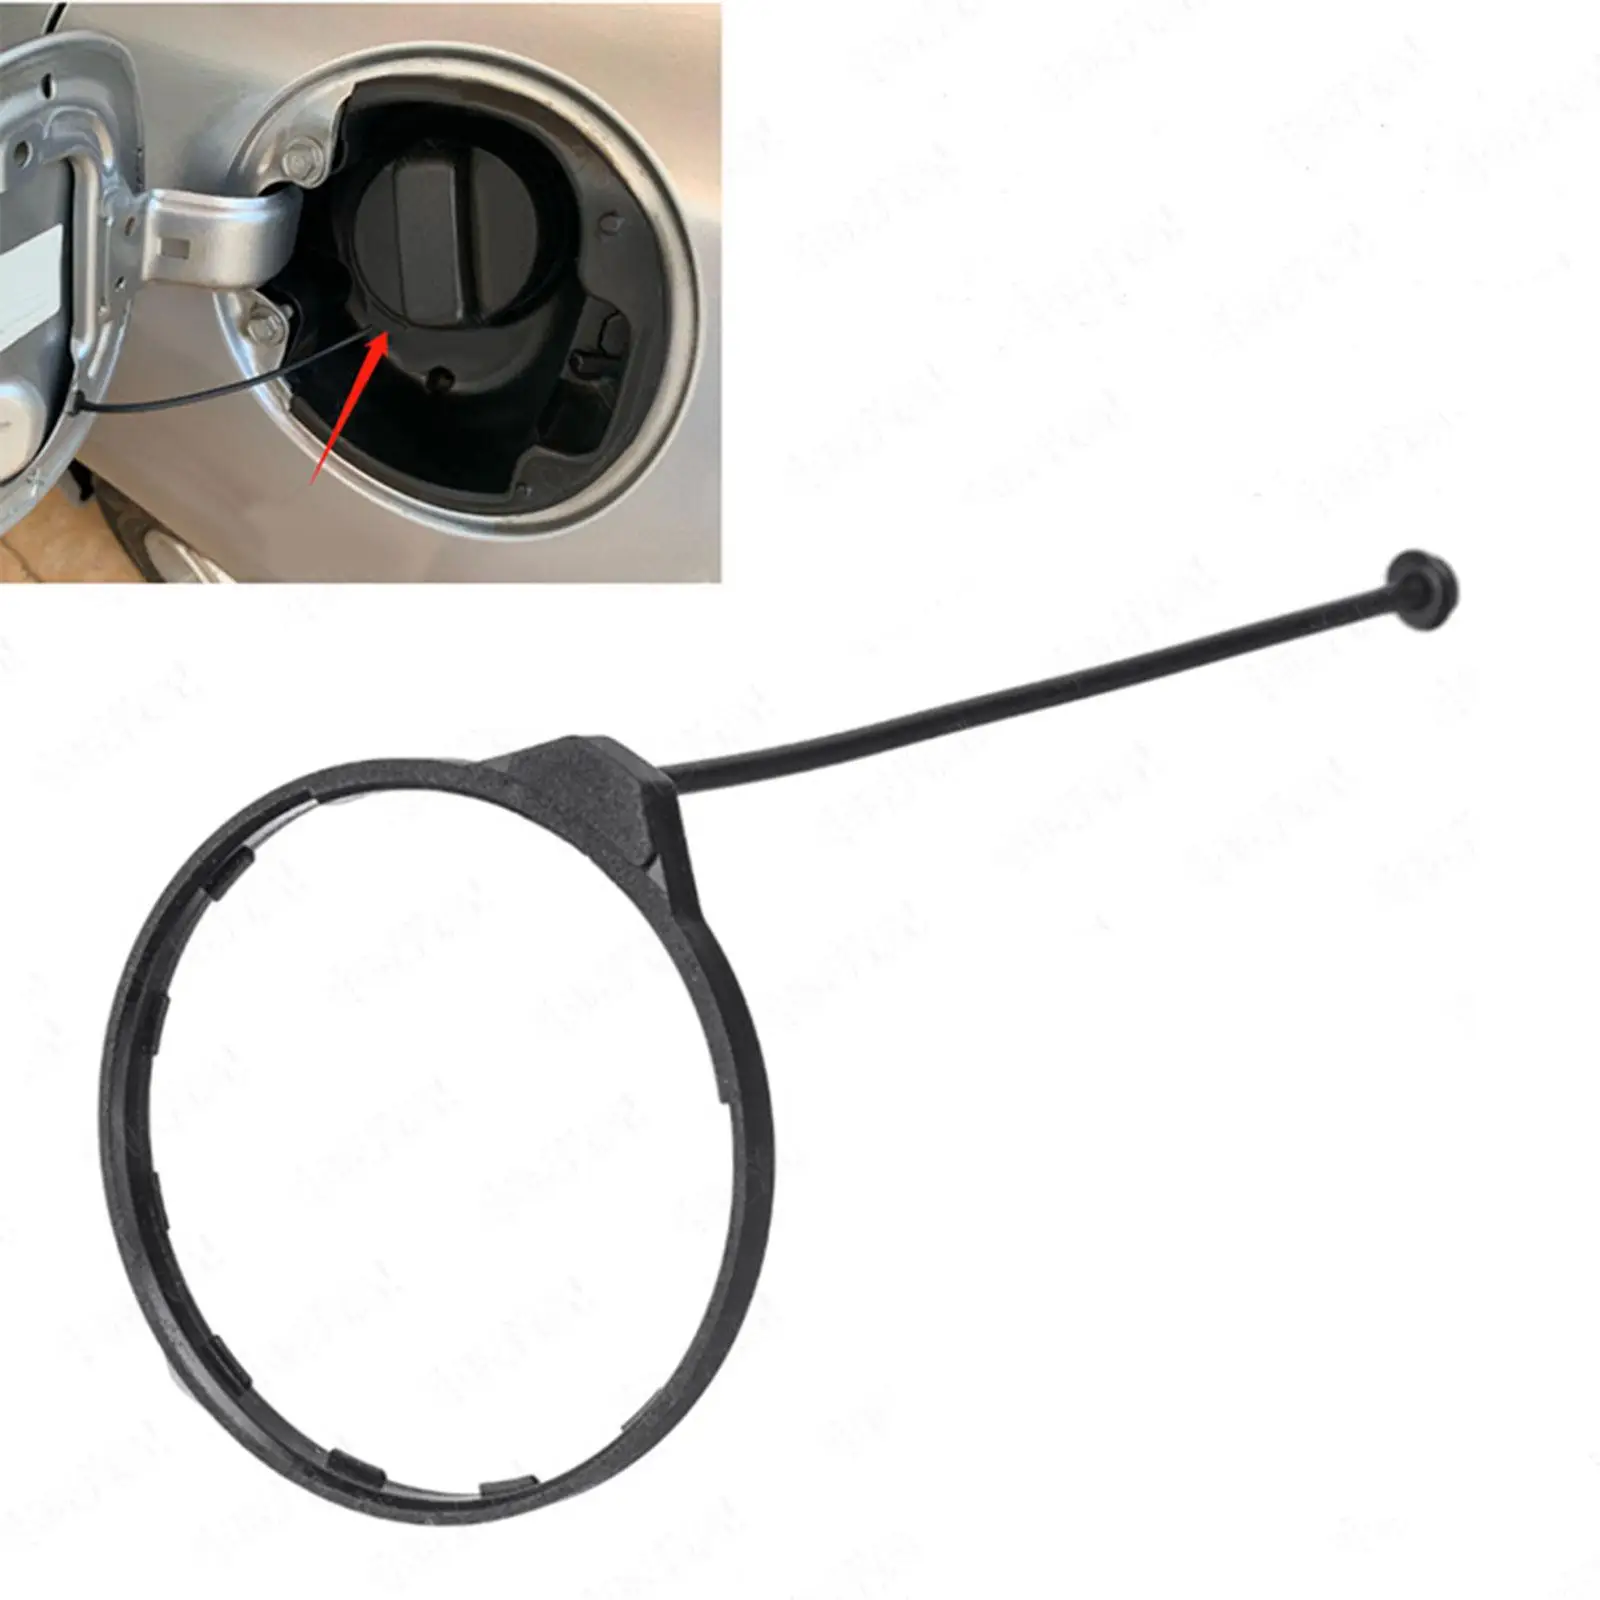 Fuel Tank Filler Gas Cap Tether Rope Accessory 17670-sja-013 for Accord